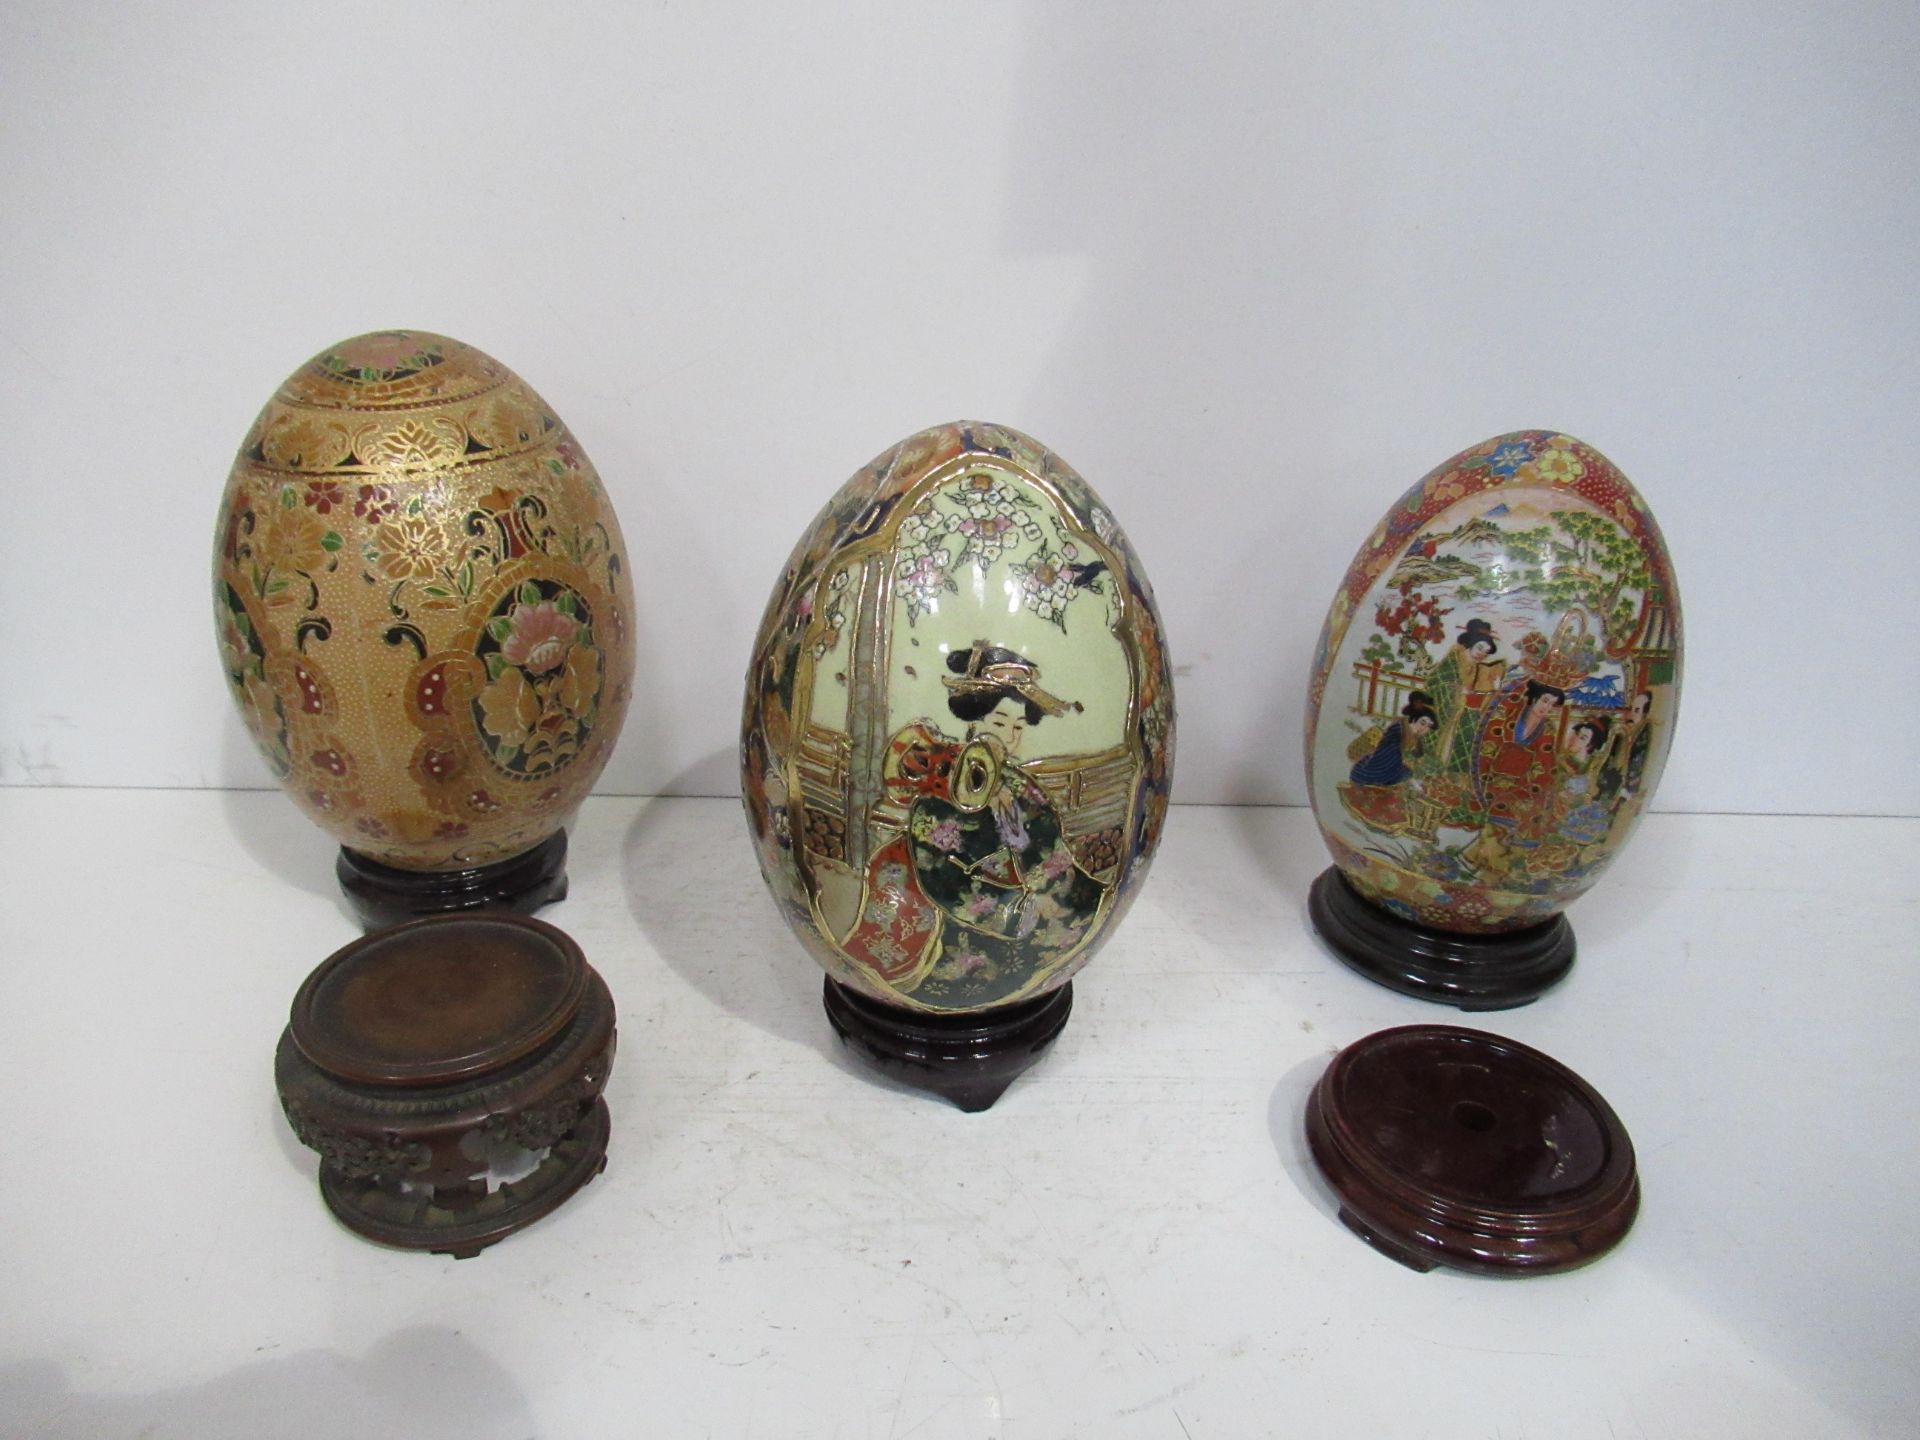 3 x Chinese Themed Painted Eggs with Five Stands (17.5cm)